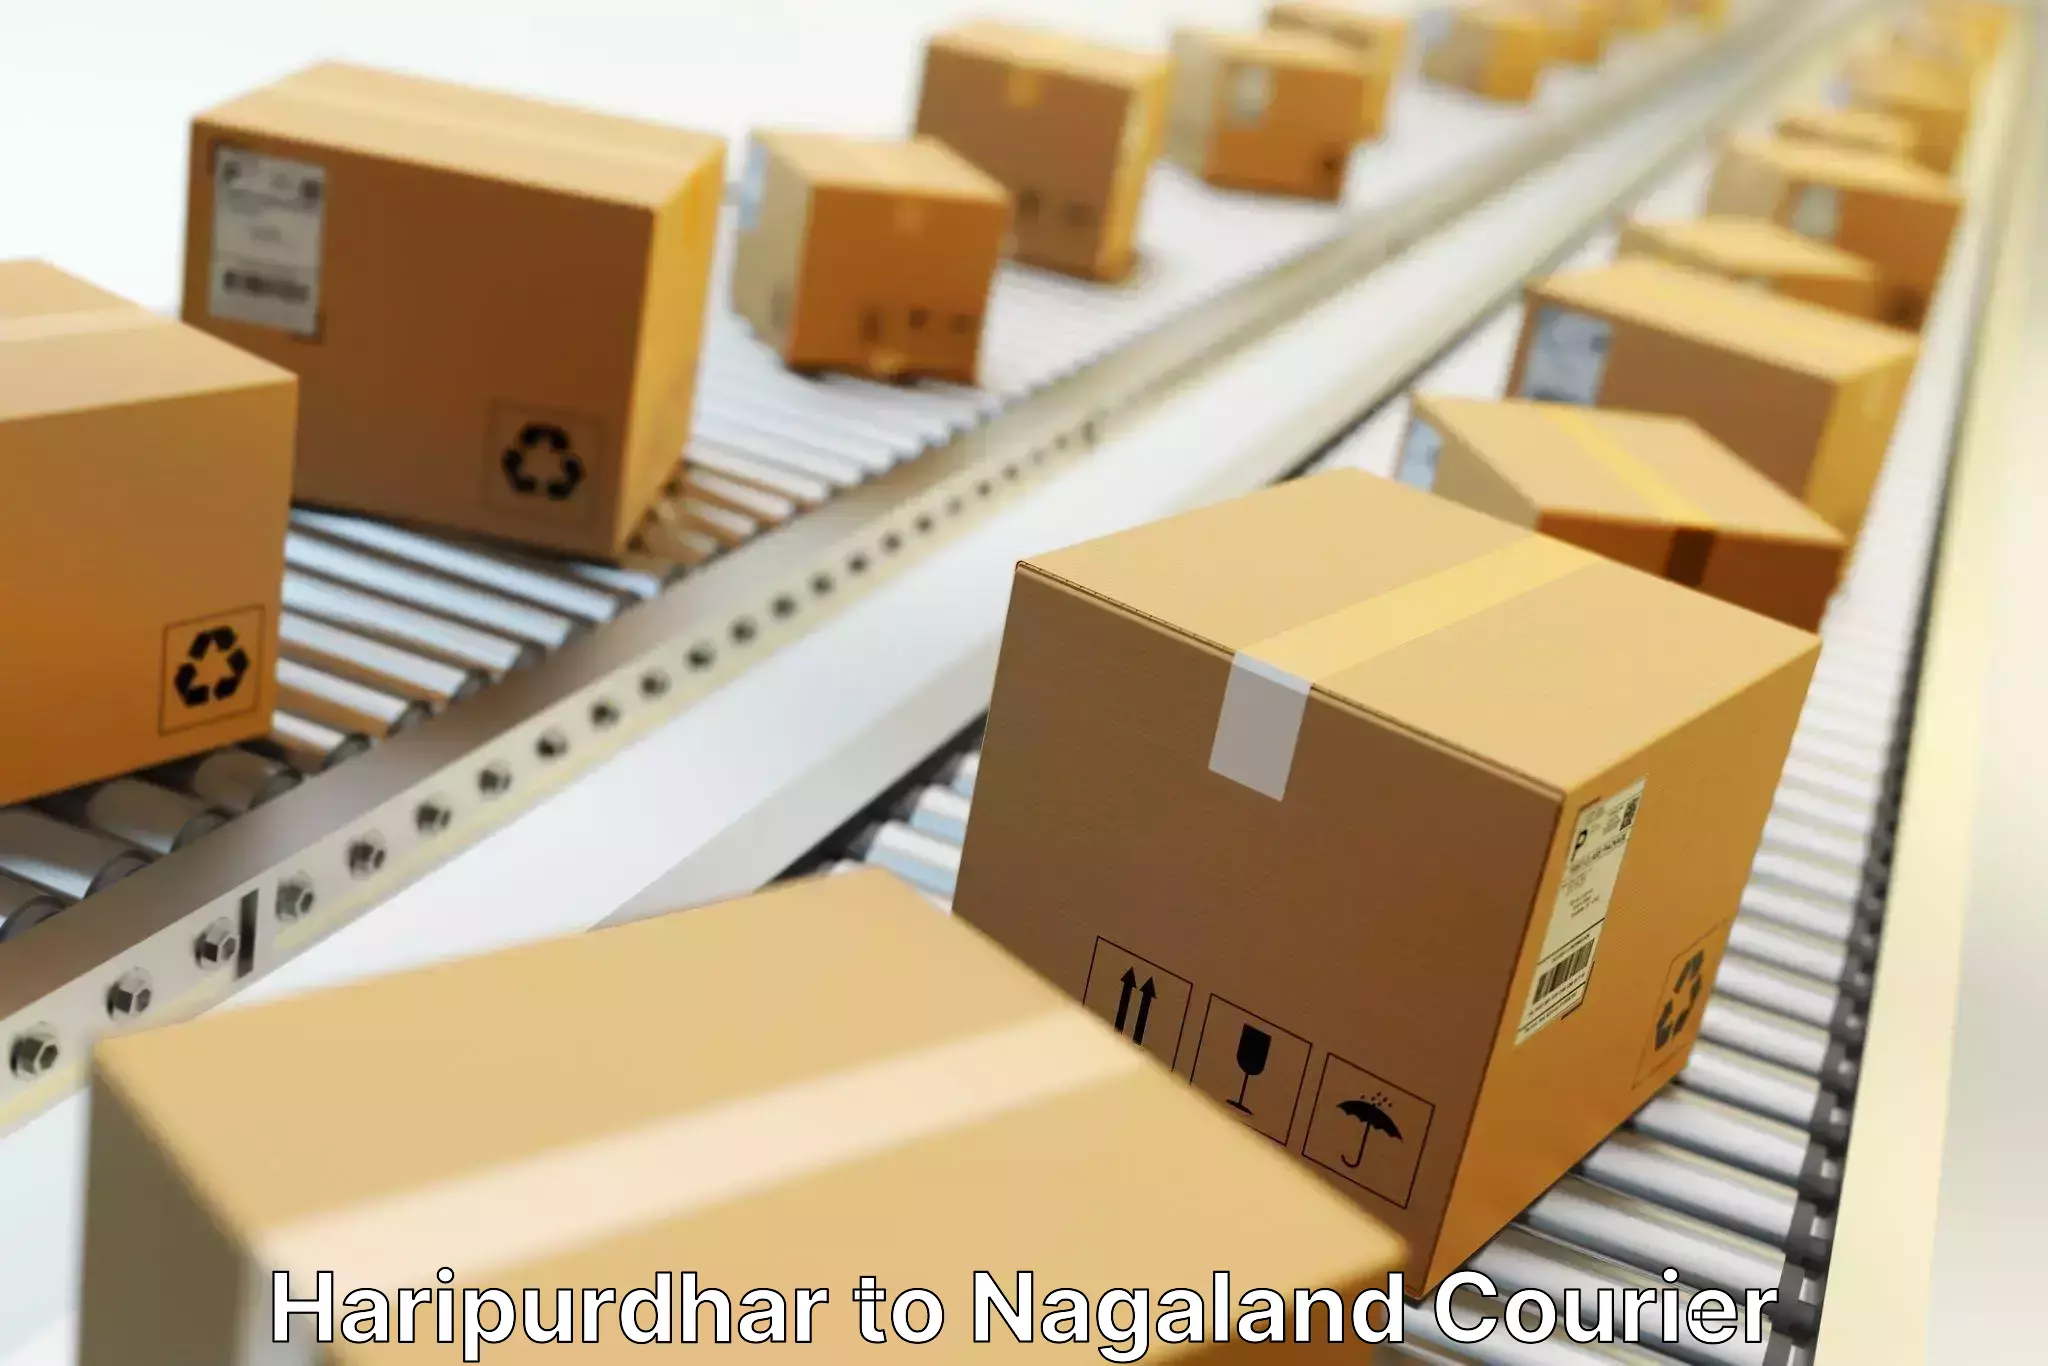 24-hour delivery options Haripurdhar to NIT Nagaland